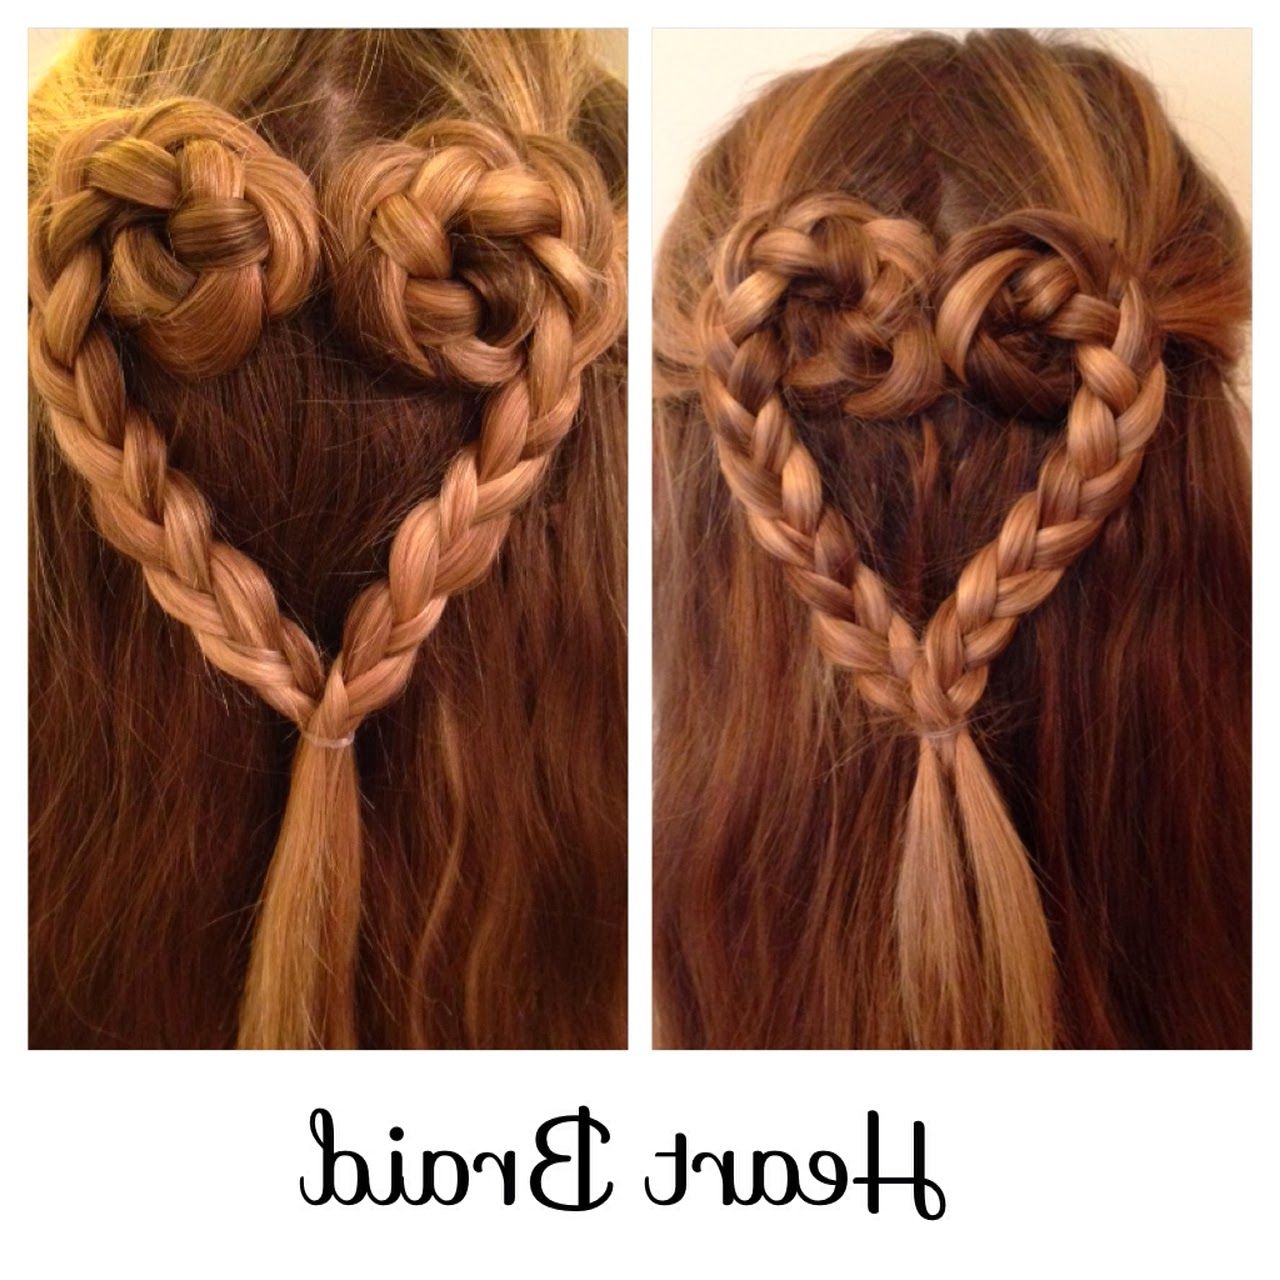 Famous Heart Braids Hairstyles Intended For Hair Stylesliberty: The Heart Braid (View 20 of 20)